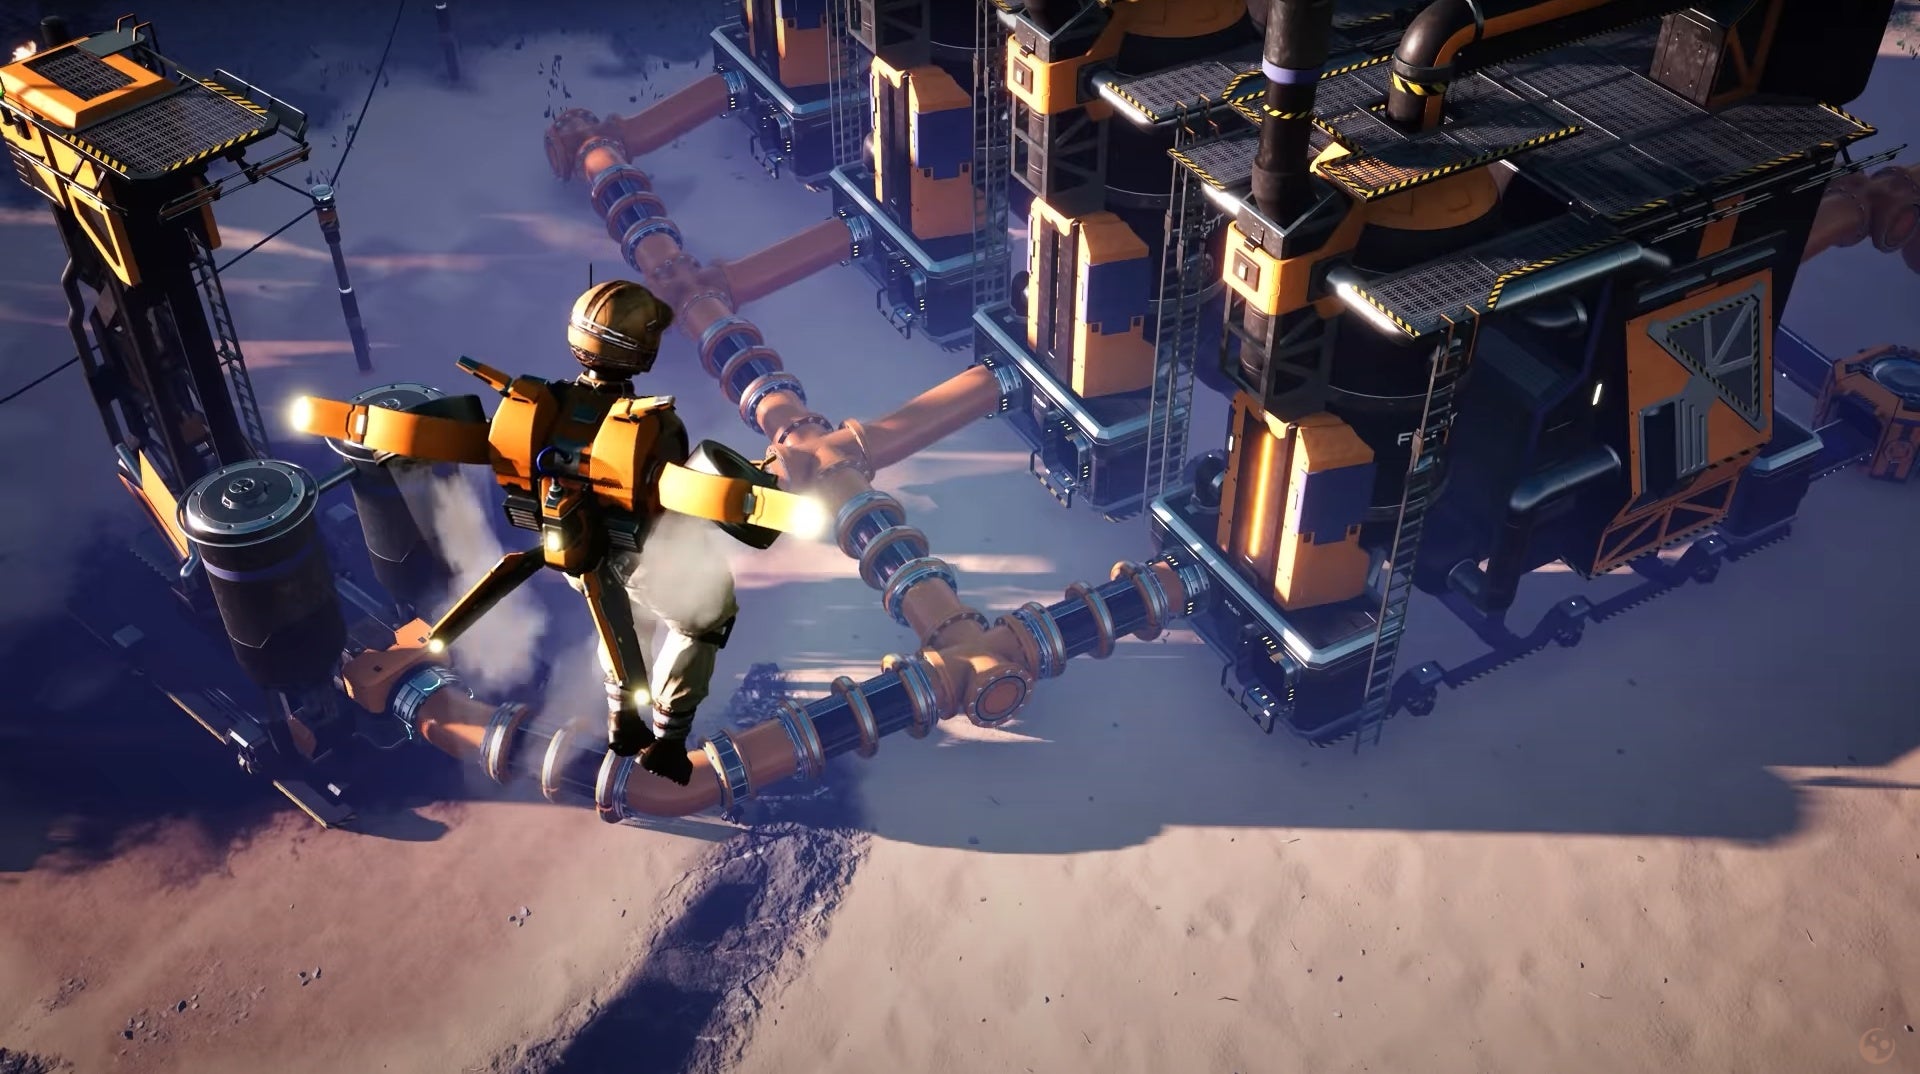 Satisfactory’s major update 4 is now available, adding gliders, drones and more